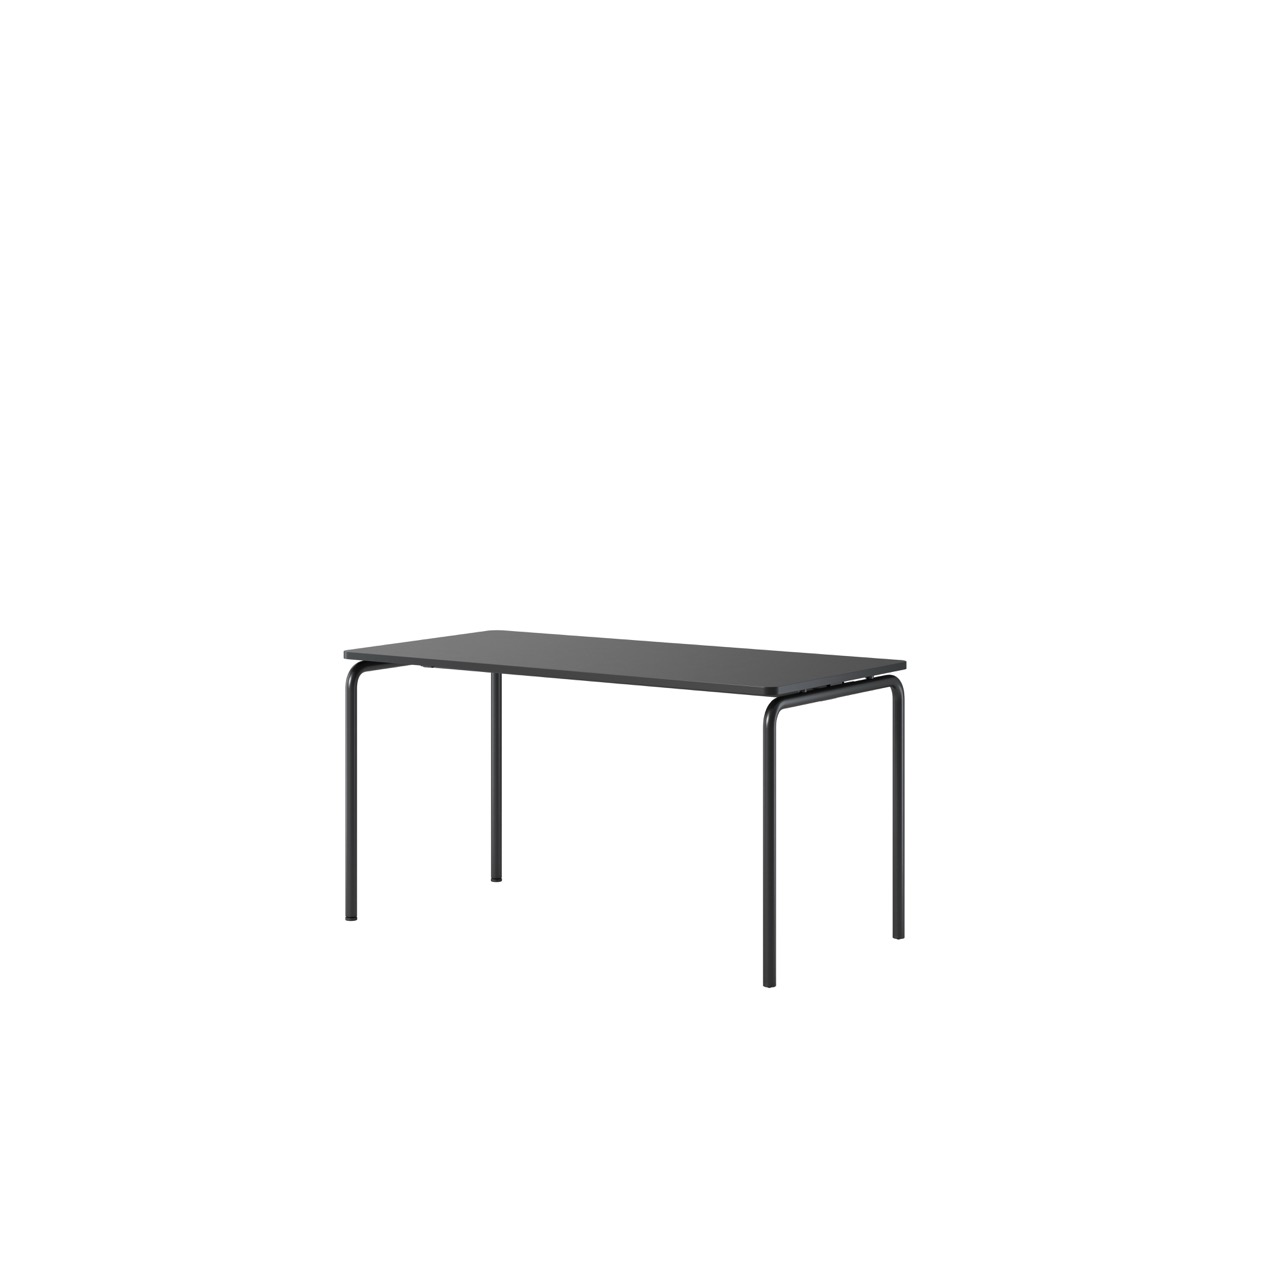 OCEE&FOUR - Tables - Four_Real 74 - 140 x 70 - Straight - Packshot Image 1 Large